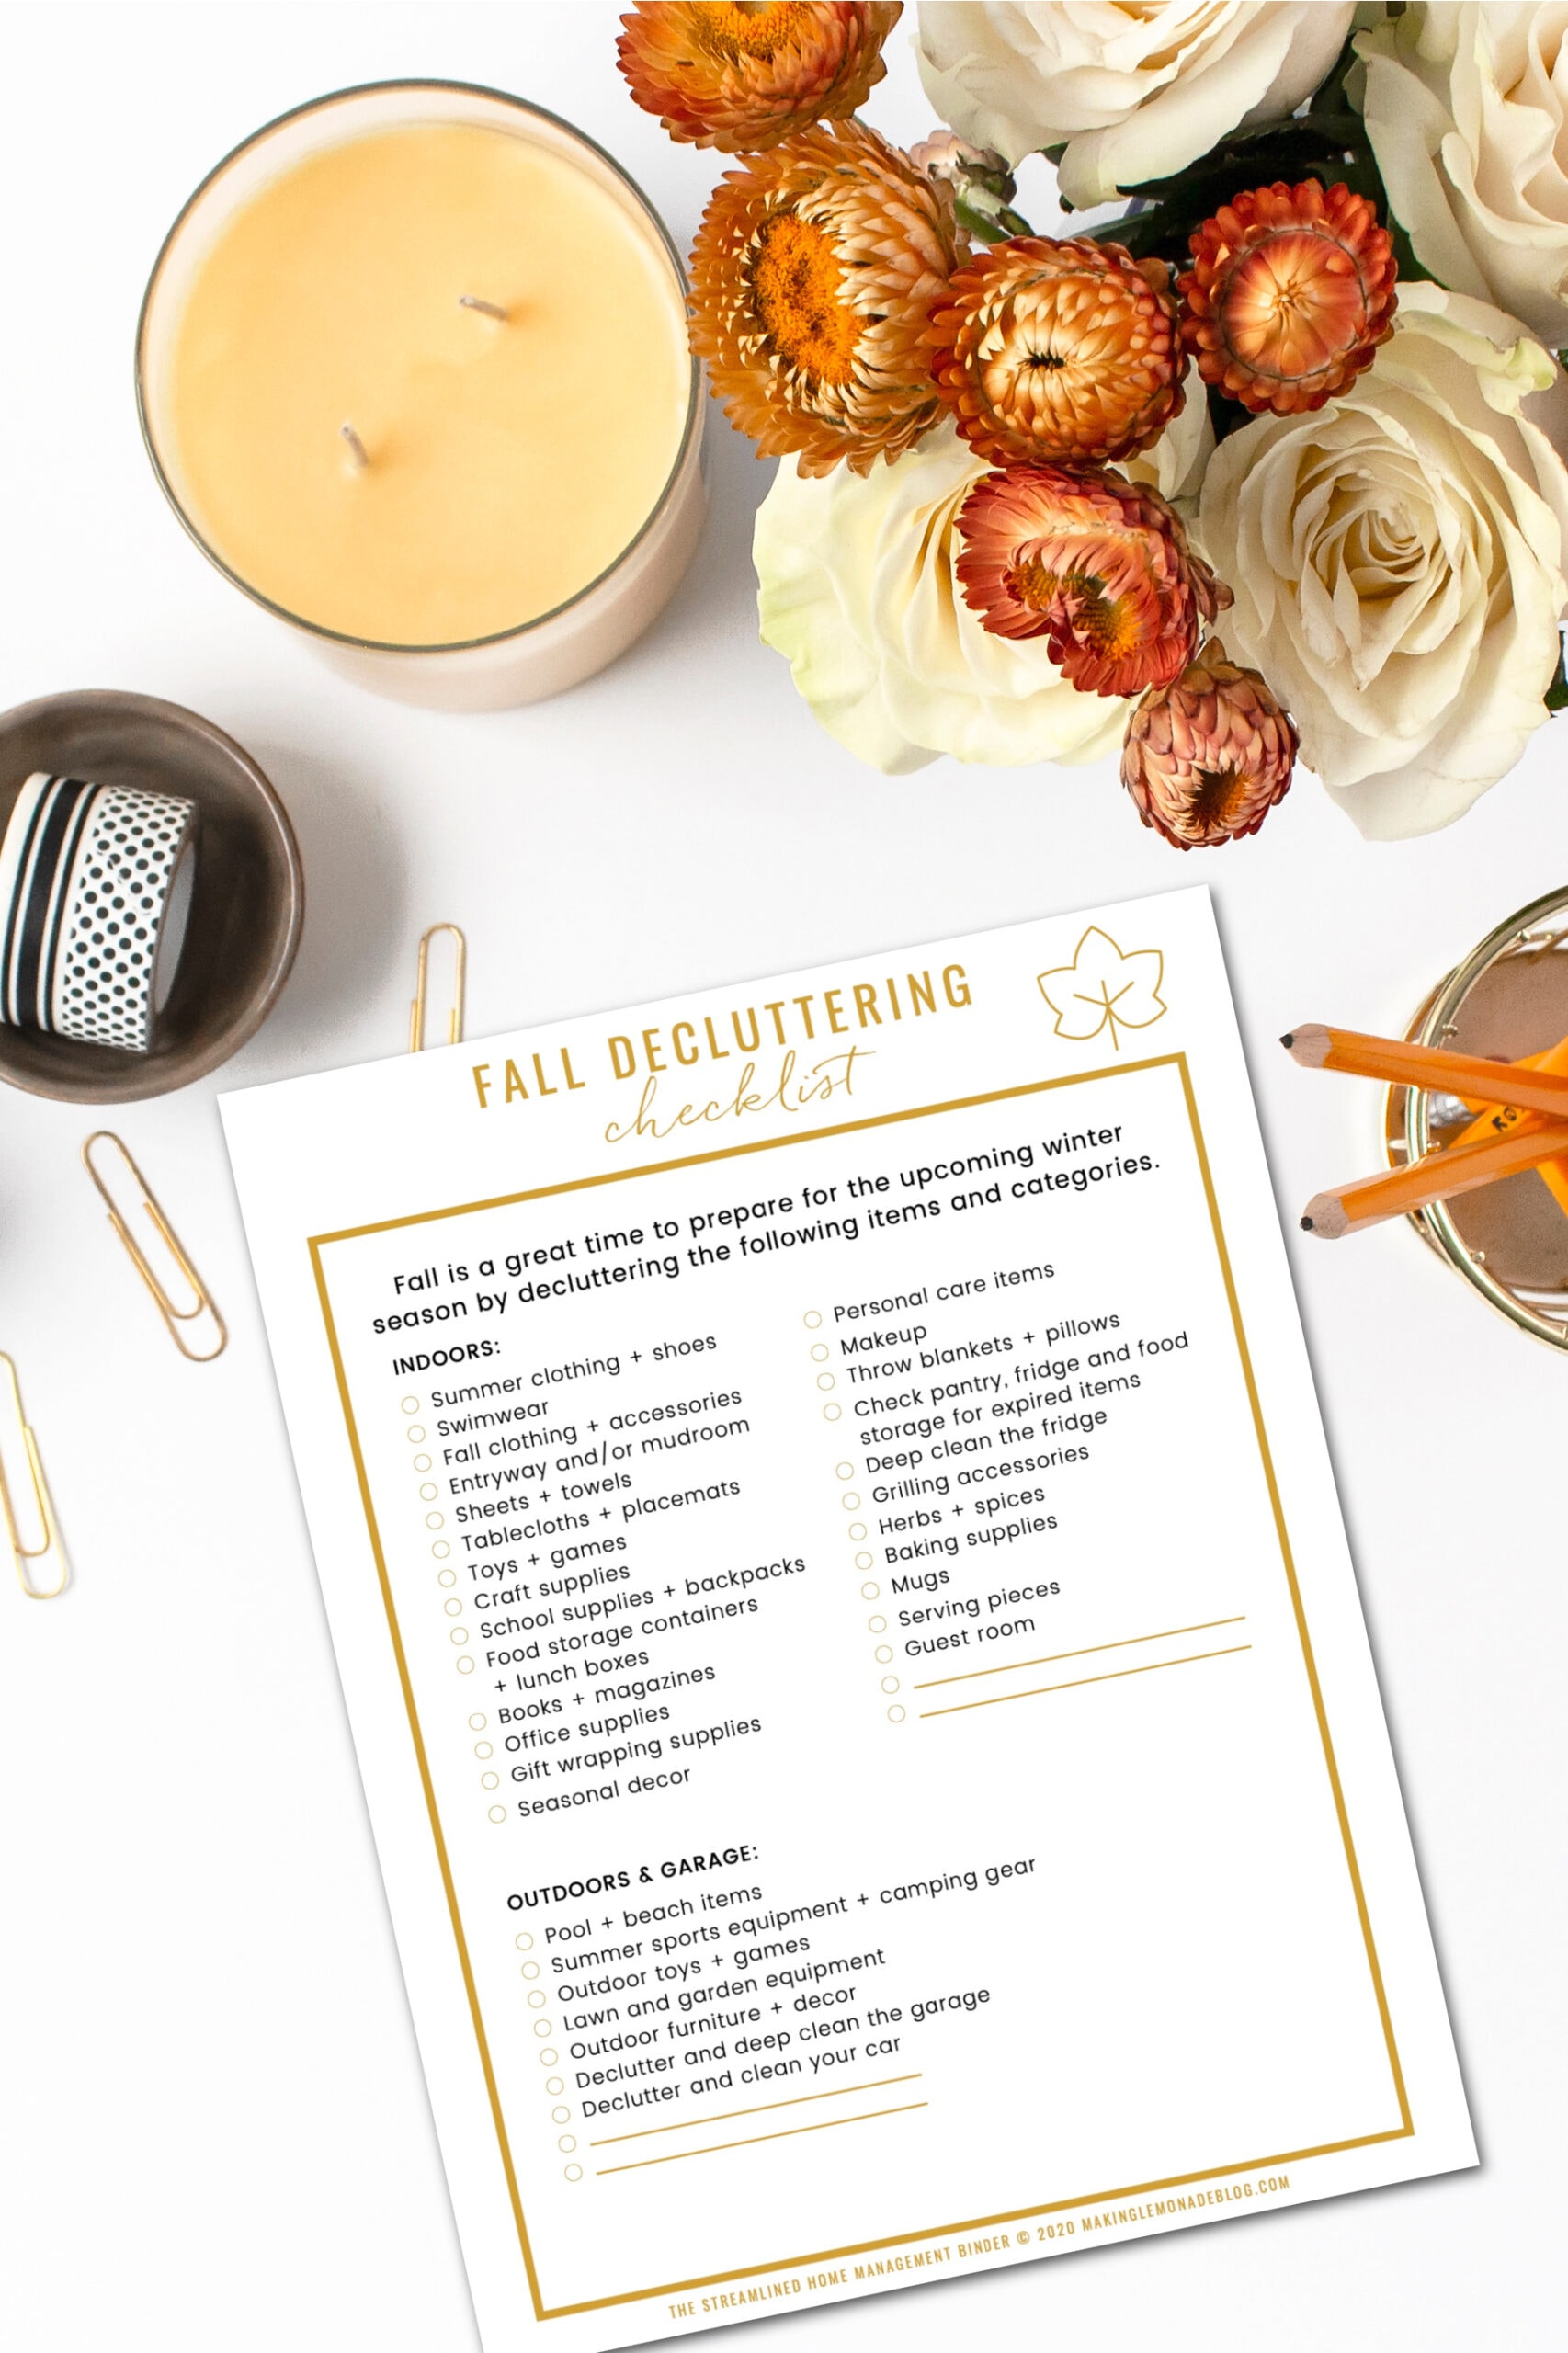 fall decluttering checklist on table